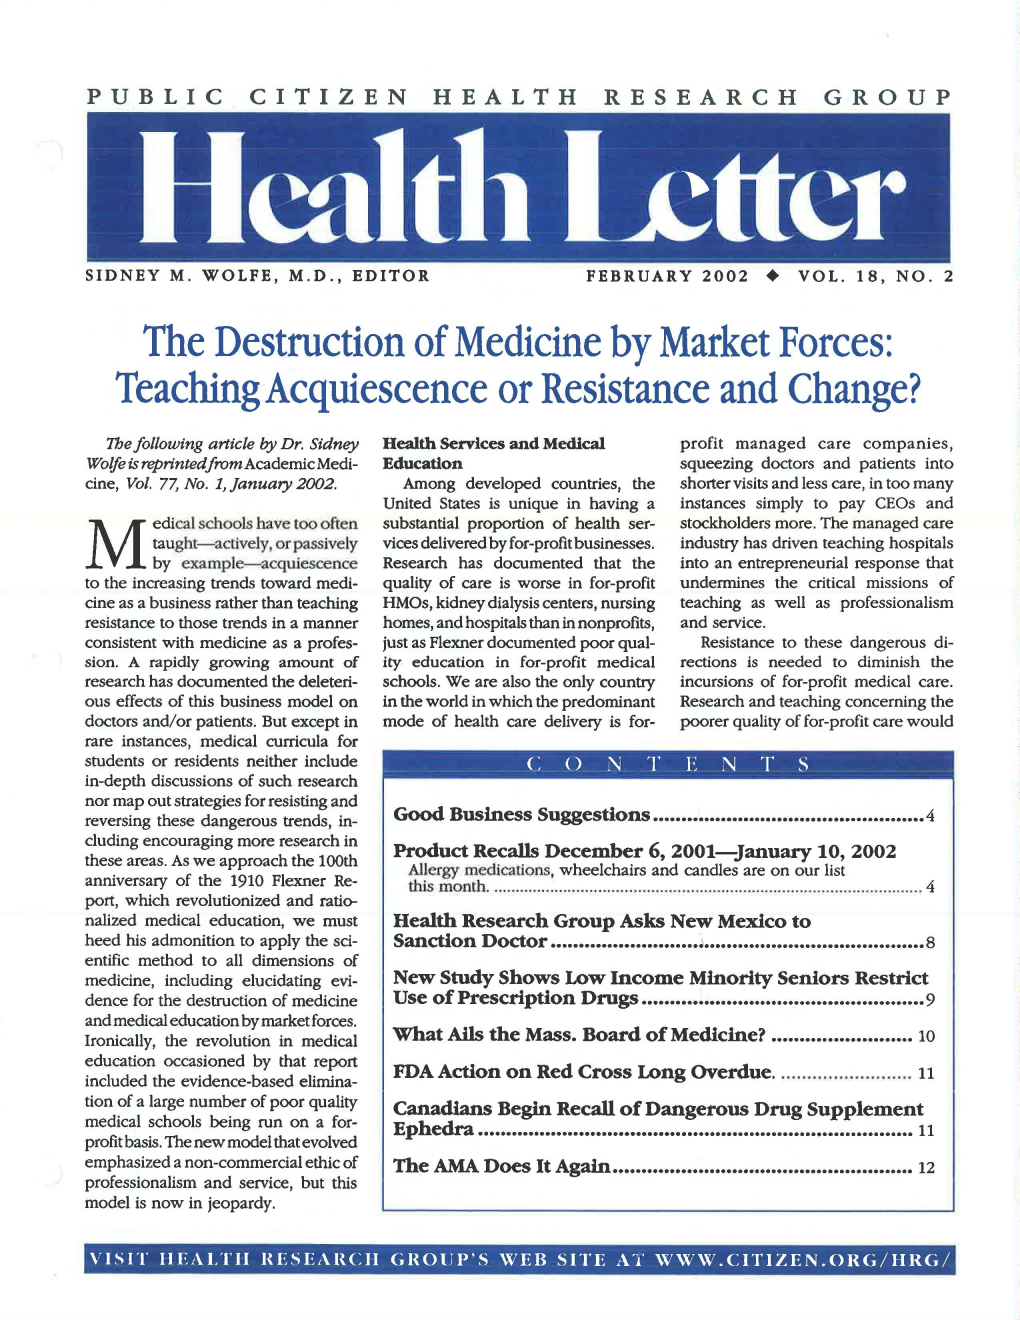 The Destruction of Medicine by Market Forces: Teaching Acquiescence Or Resistance and Change?